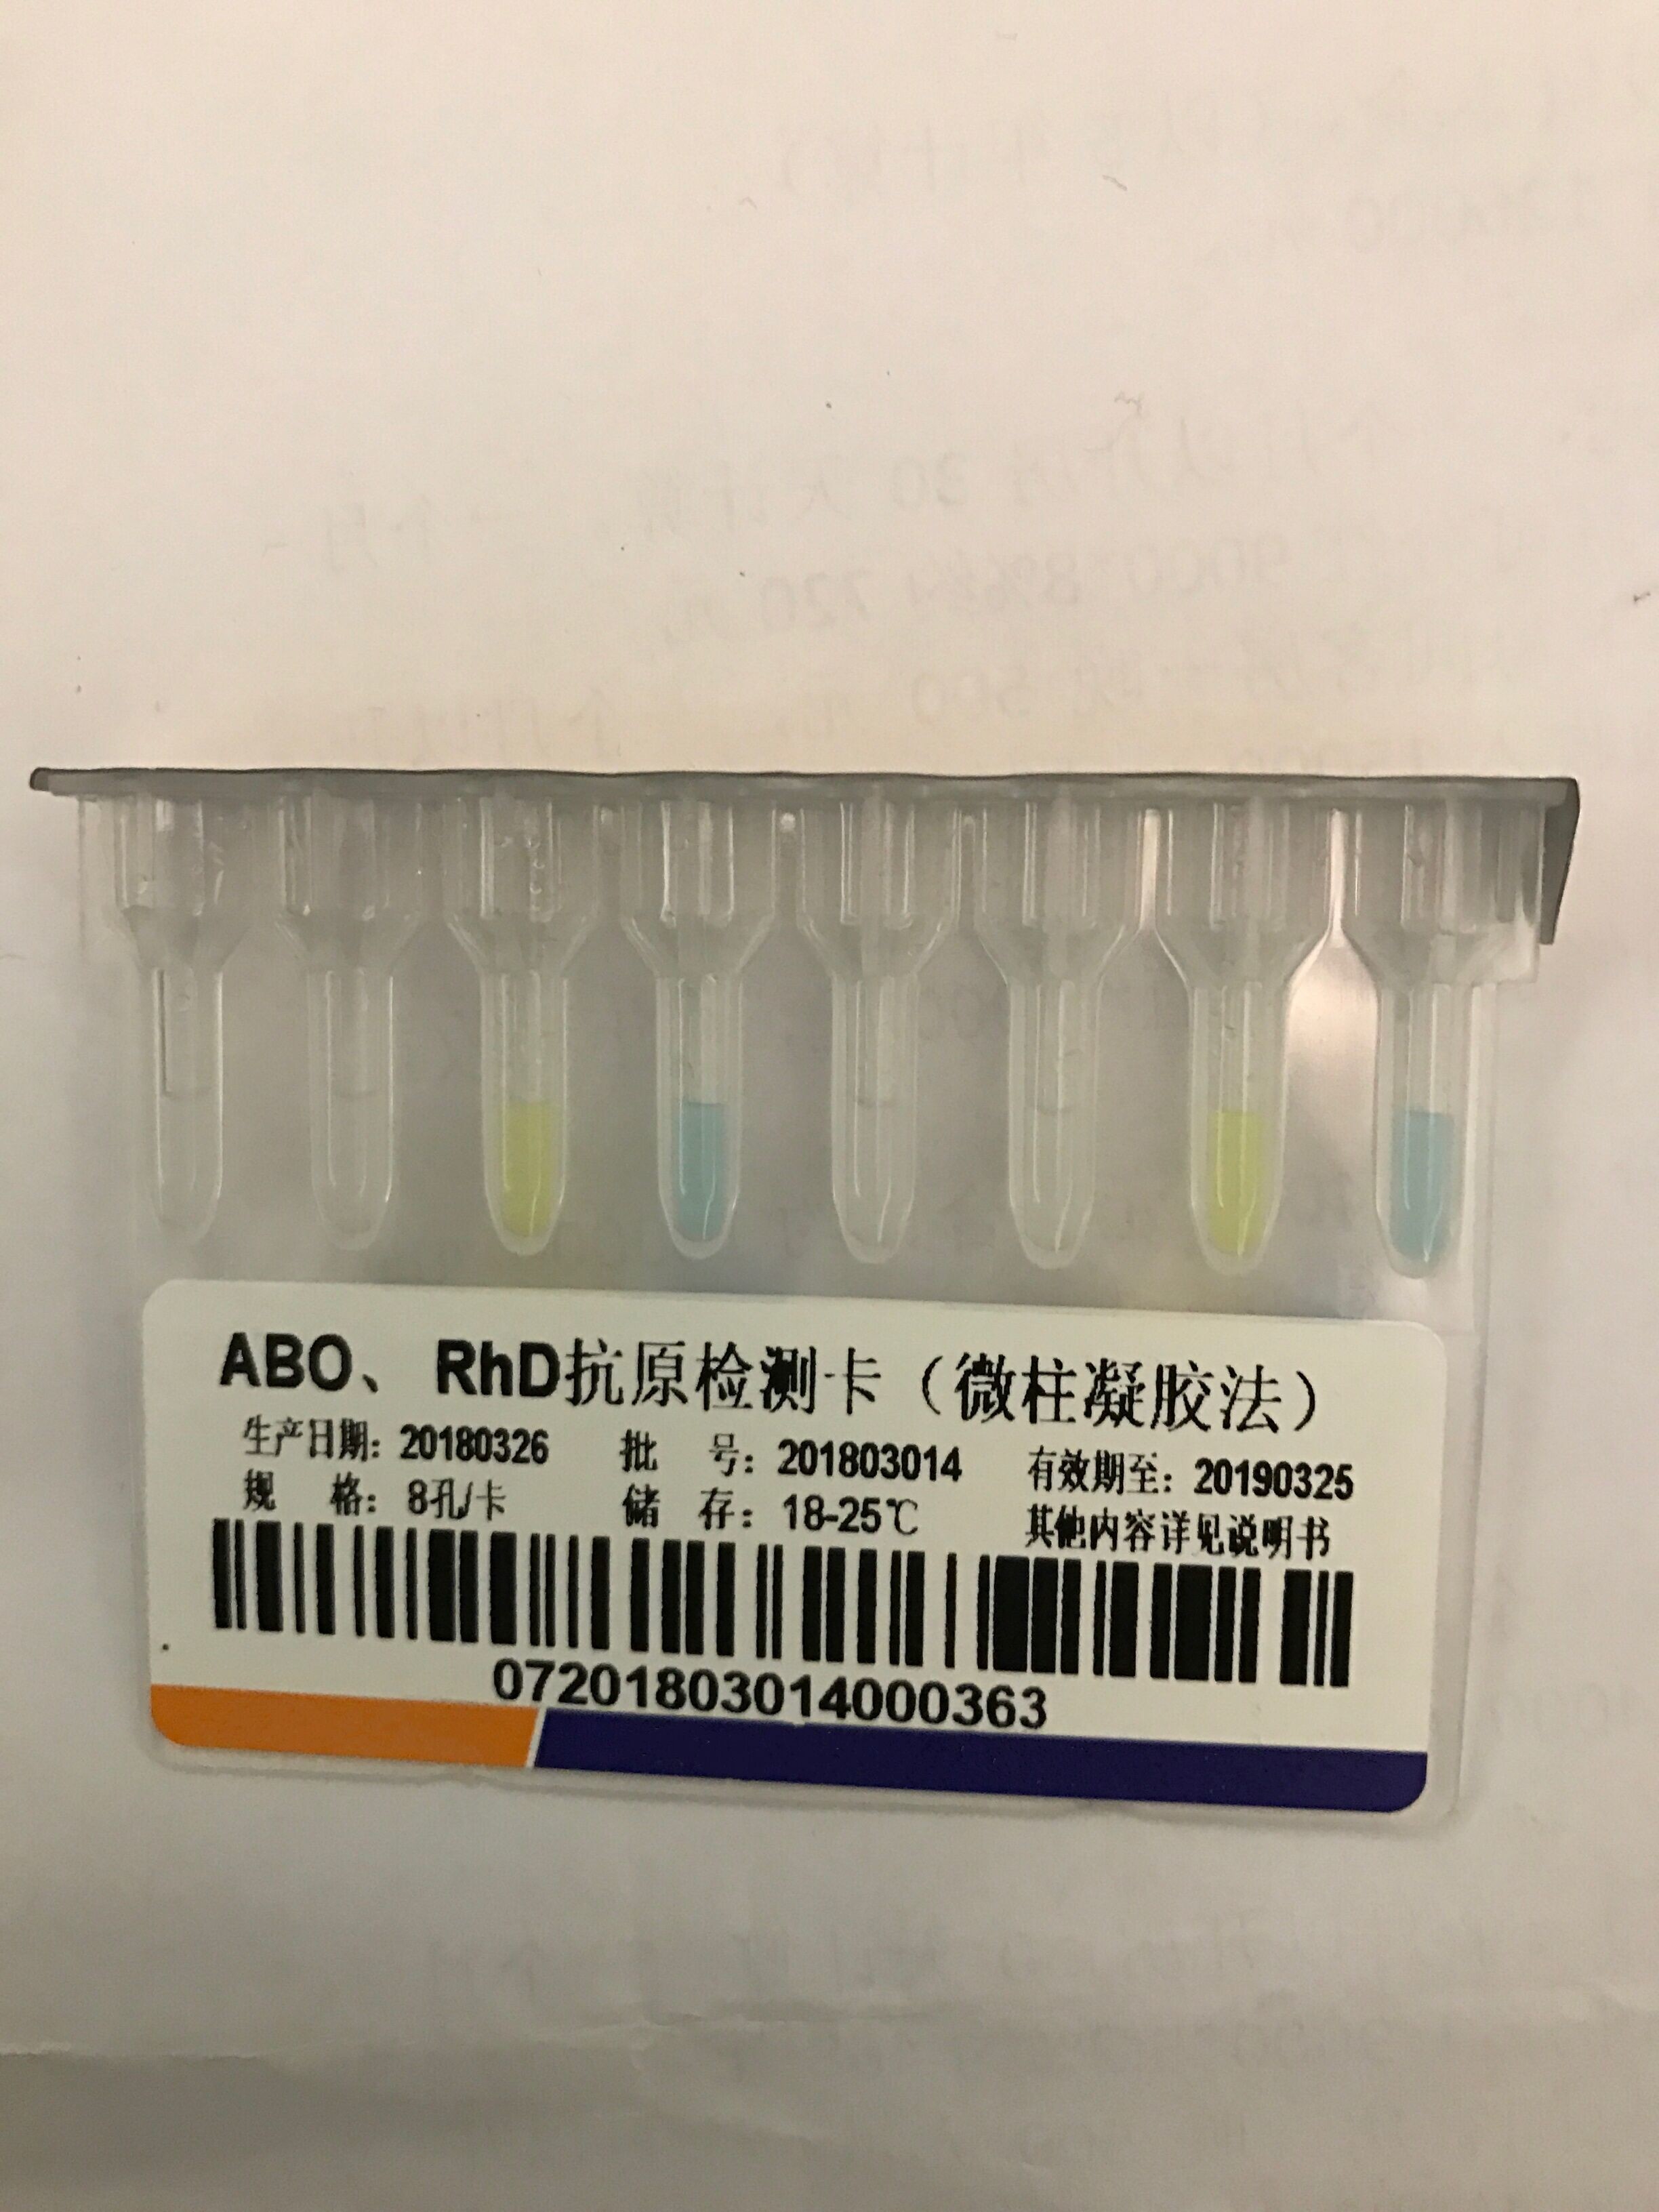 China Effective Microcolumn Gel Card Clinical For ABO And RhD Blood Group Antigen Detection wholesale